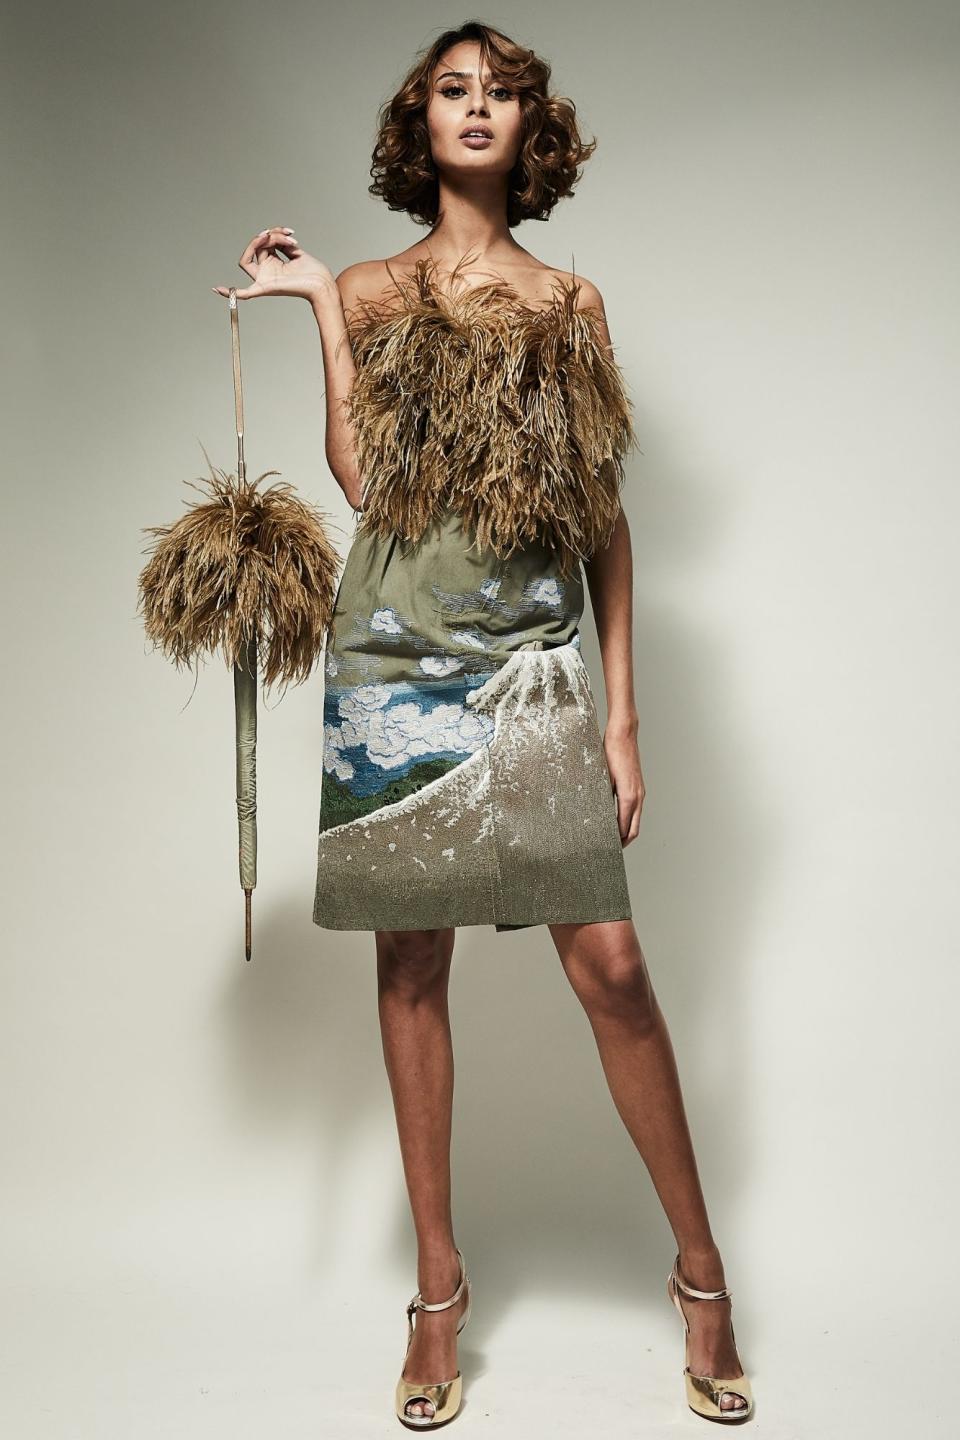 The upcycled “Mount Fuji” dress by French nonprofit Renaissance. - Credit: Laurence Laborie/c’Courtesy of Renaissance